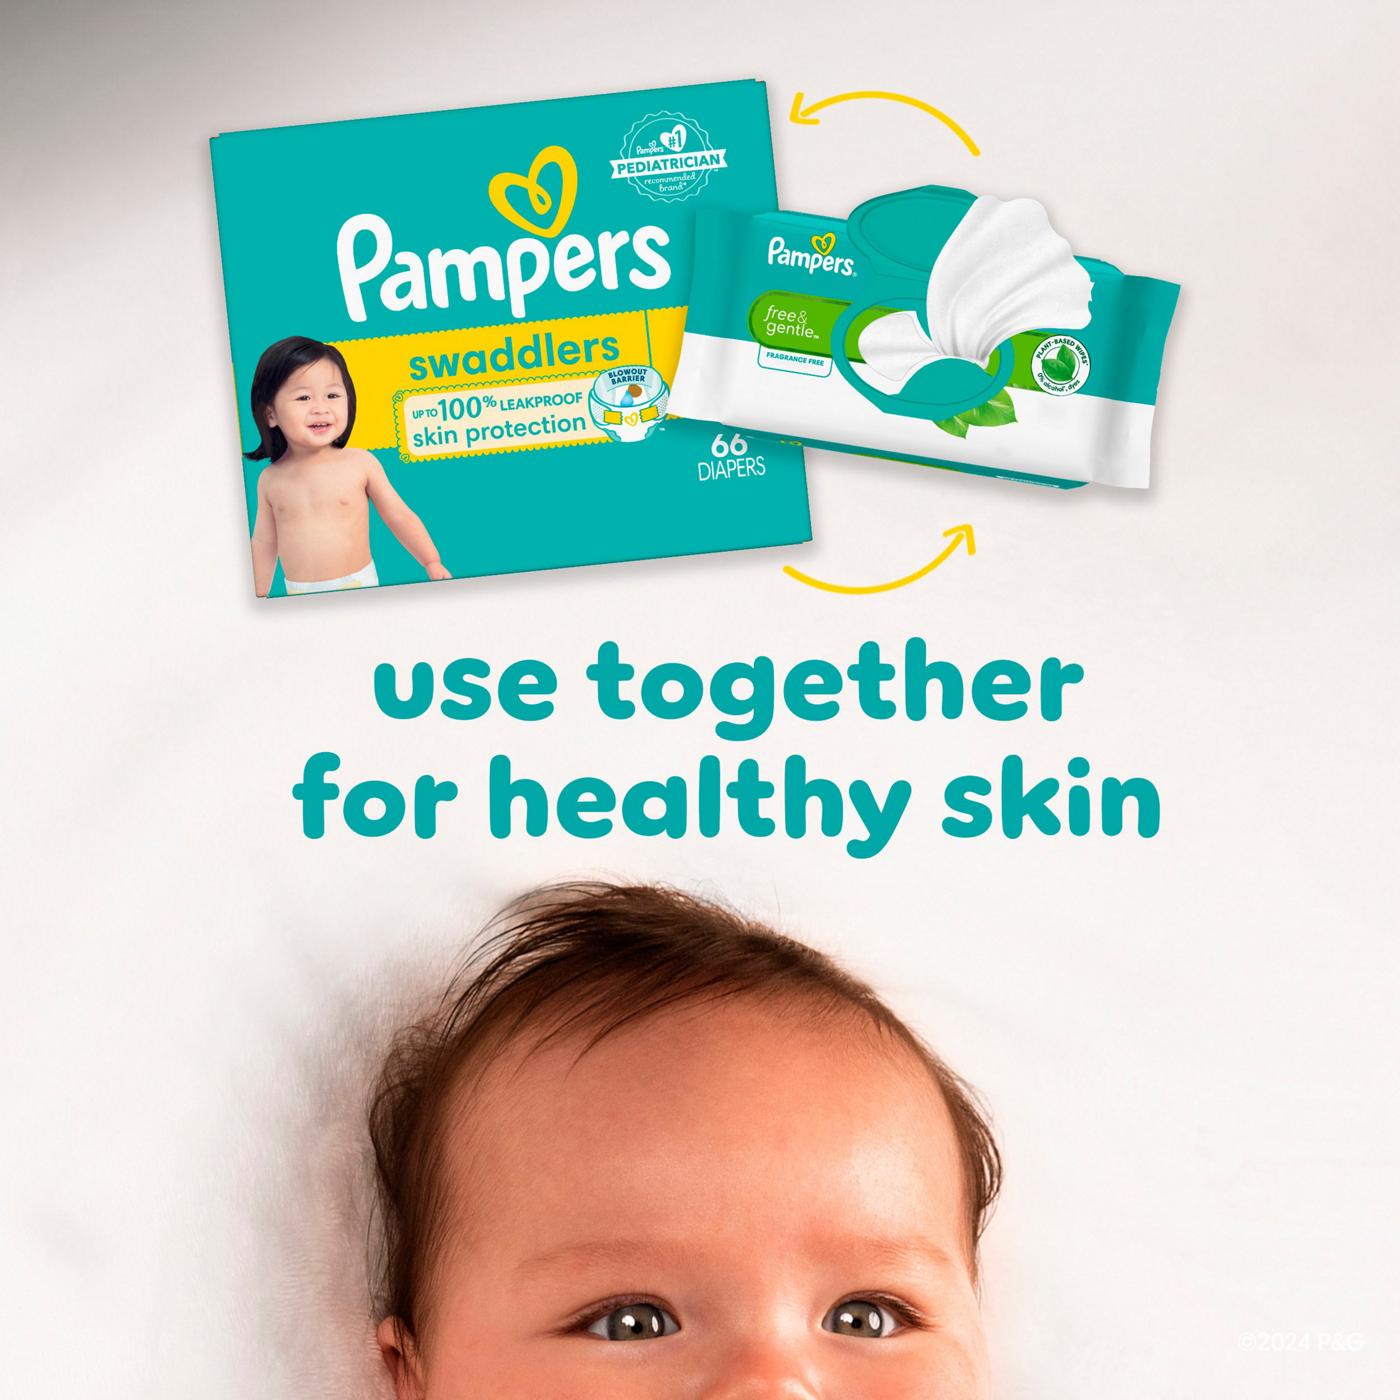 Pampers Free & Gentle Plant Based Baby Wipes 4 pk; image 7 of 10